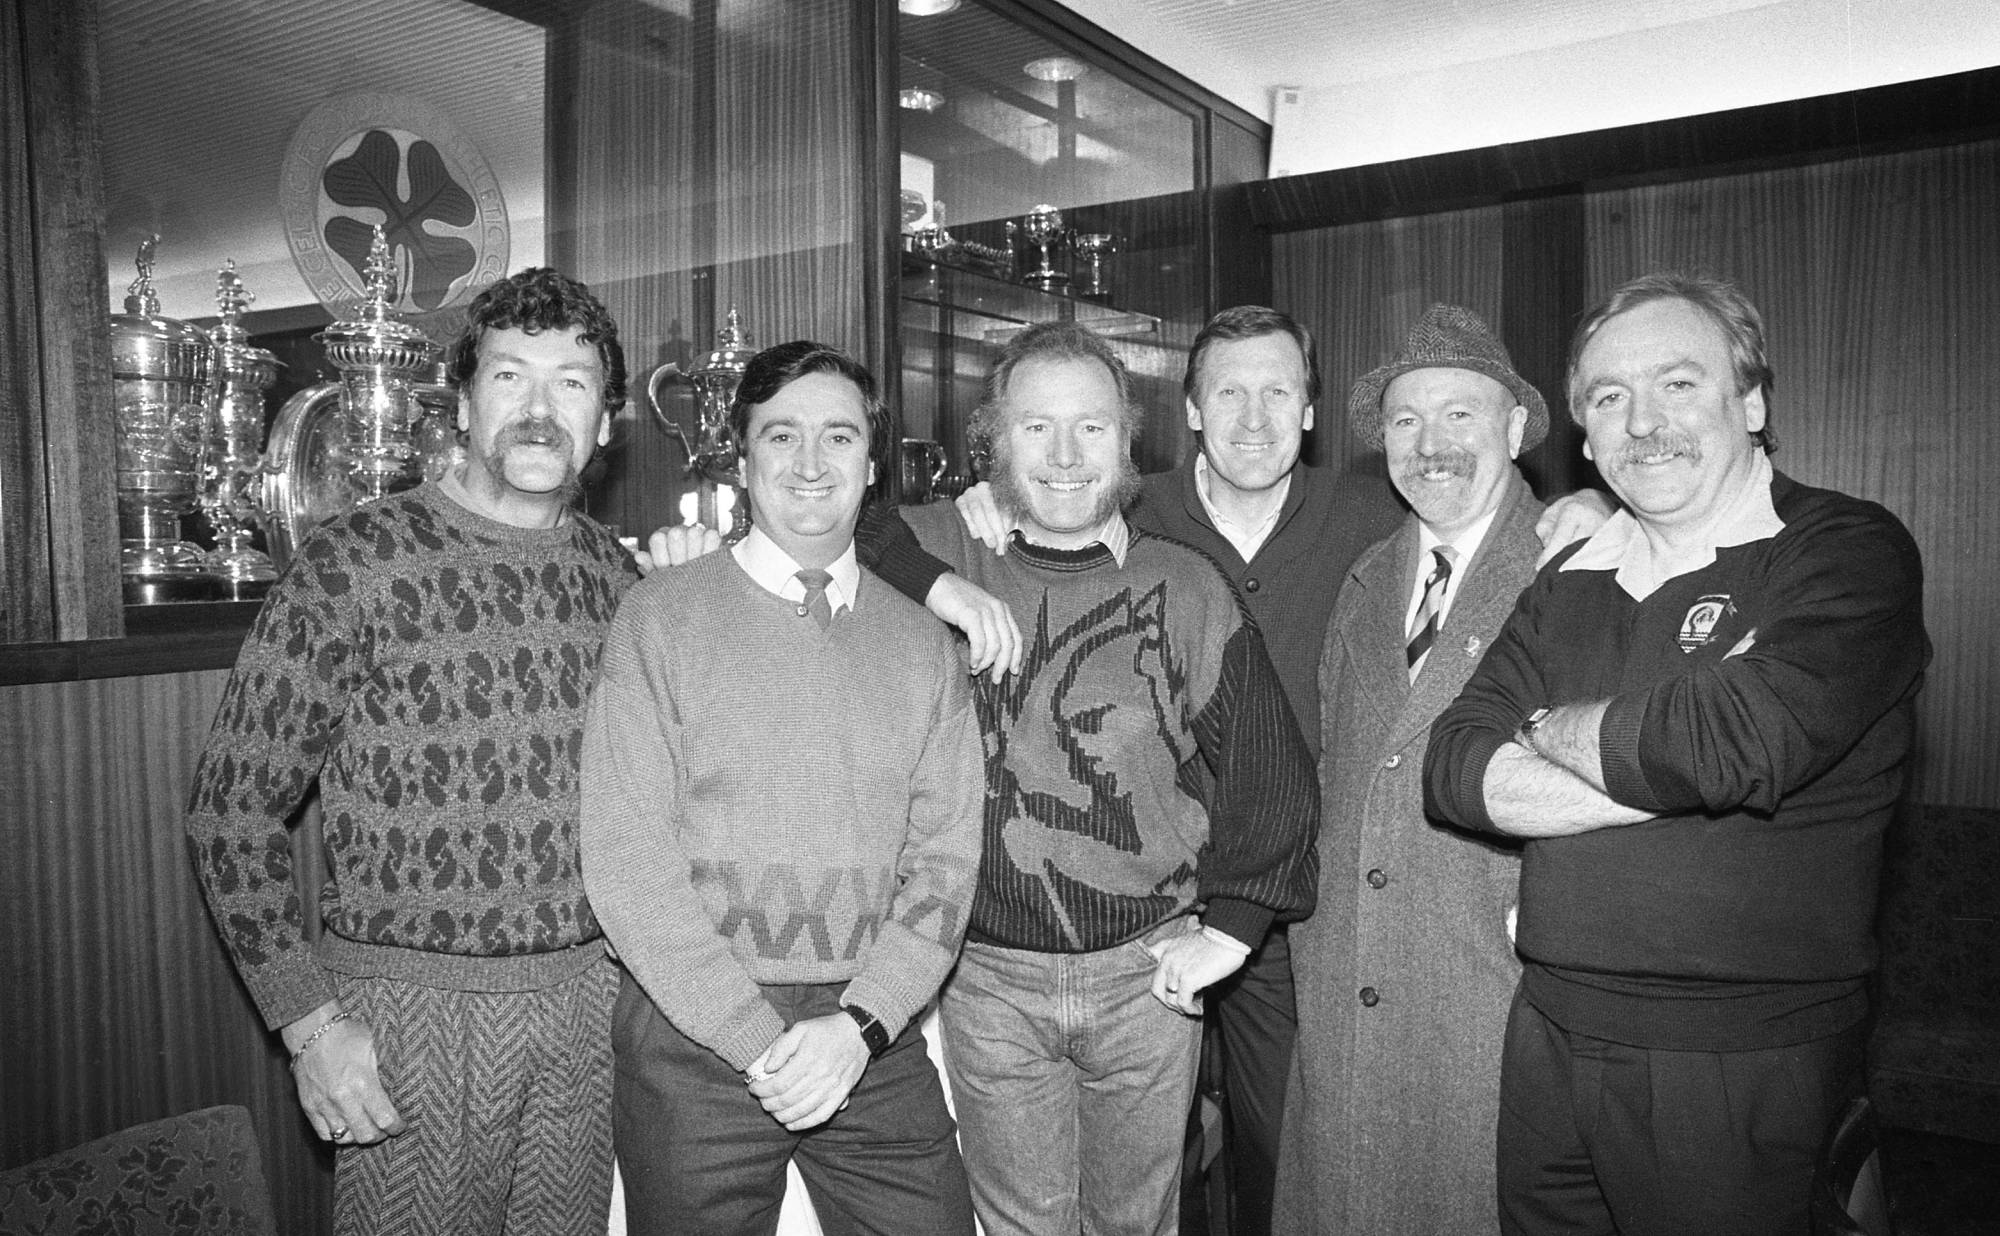 The Wolfe Tones at Celtic Park Stadium in Glasgow, circa March 1988 (Photo by Independent News and Media/Getty Images).